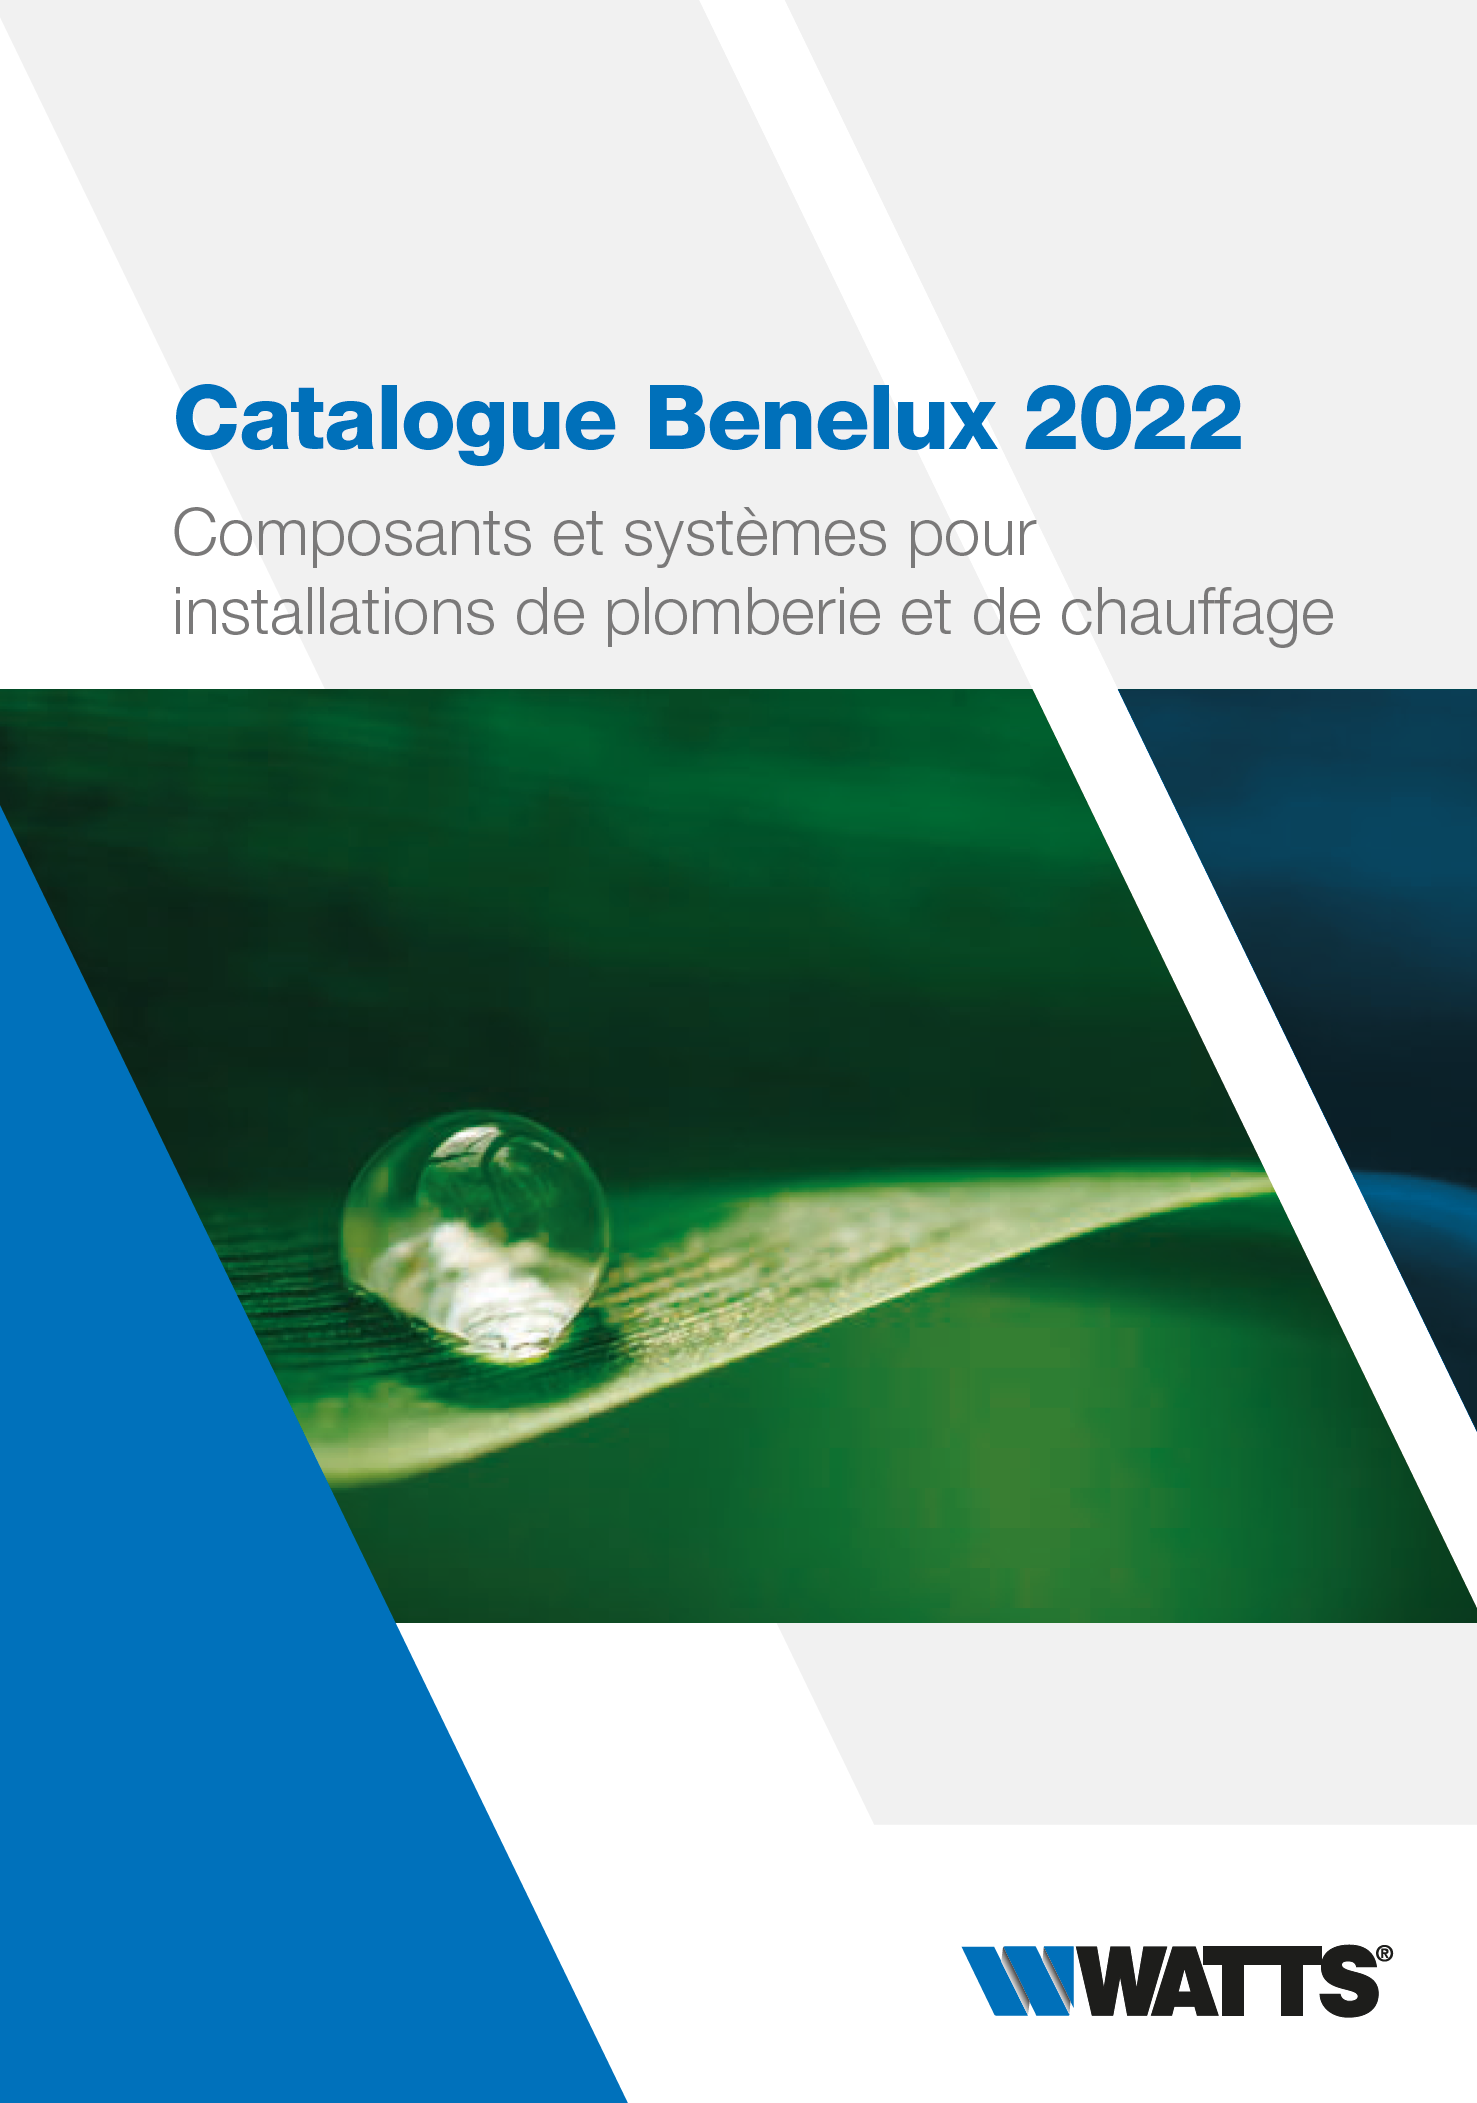 Cover-catalogus-2022-FR_Download-catalogues